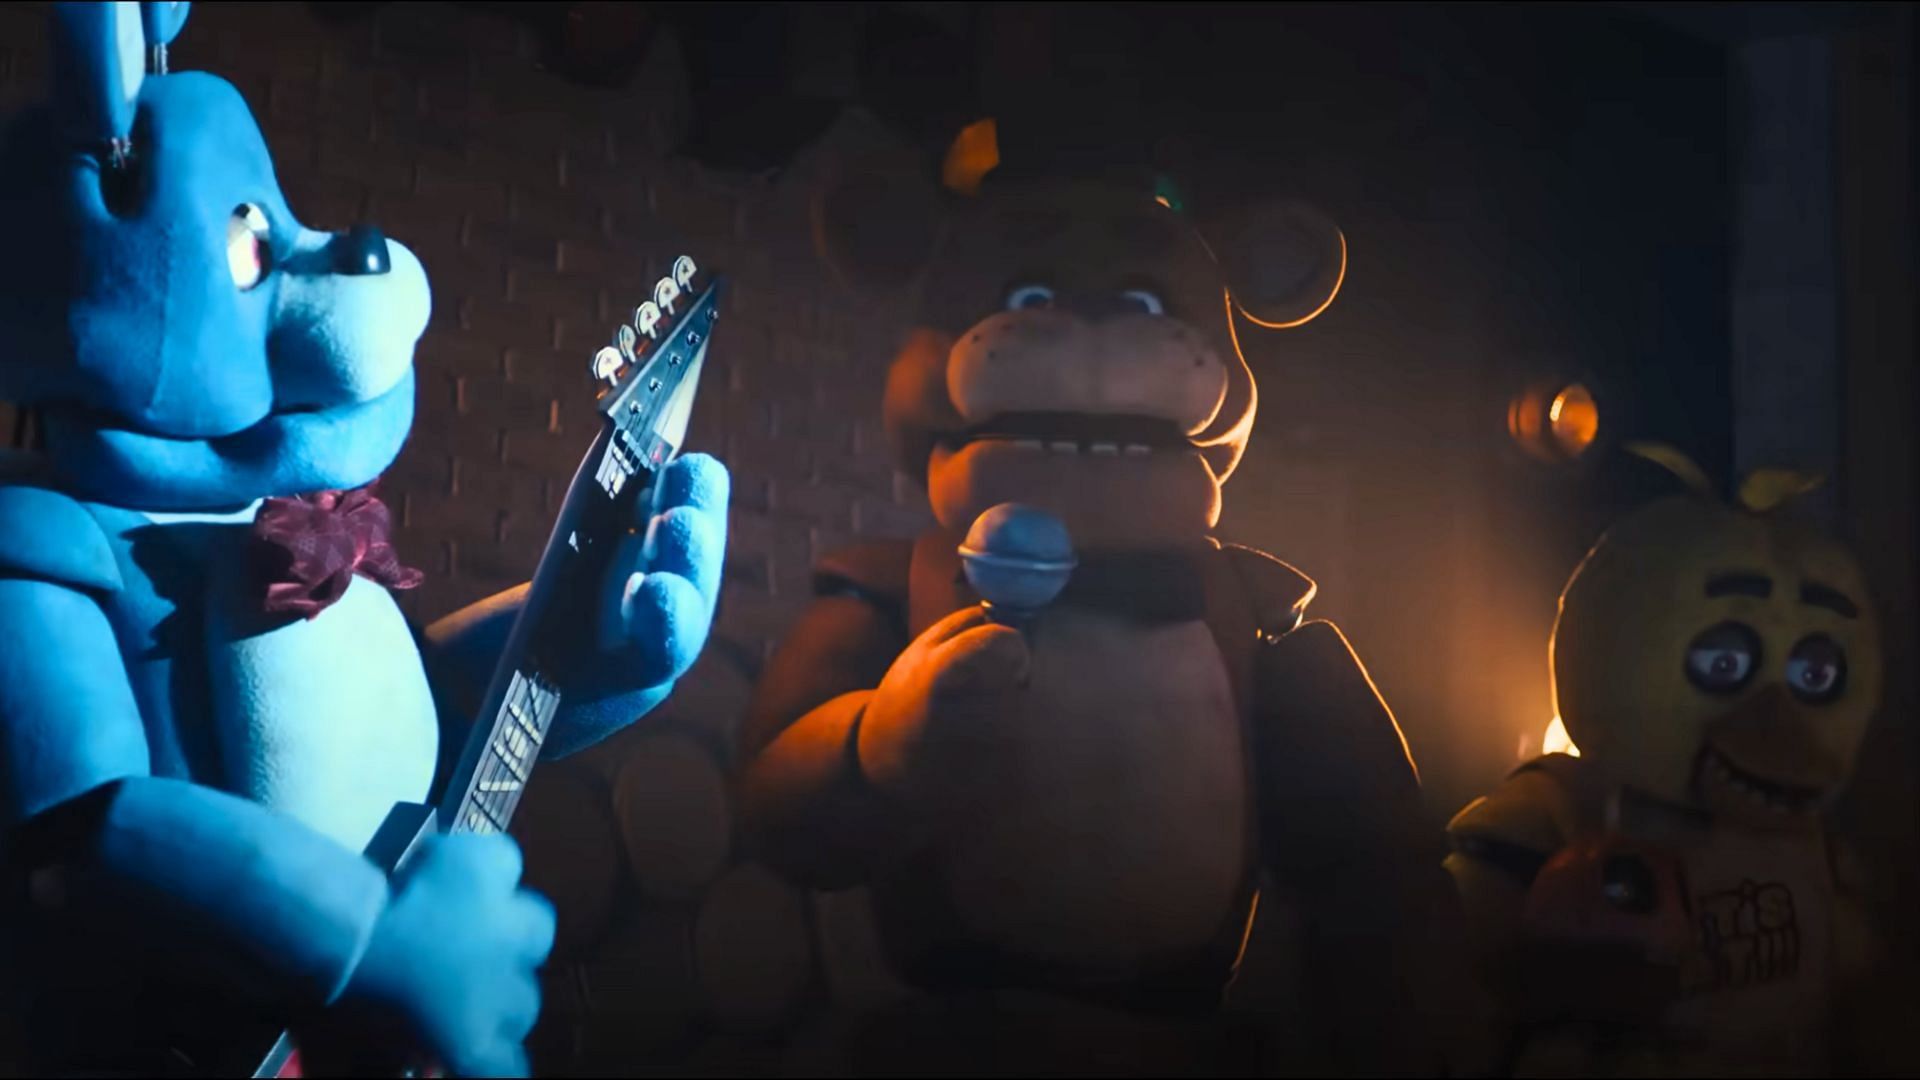 Bonnie is the lead guitarist and antagonist (Image via Universal Pictures).